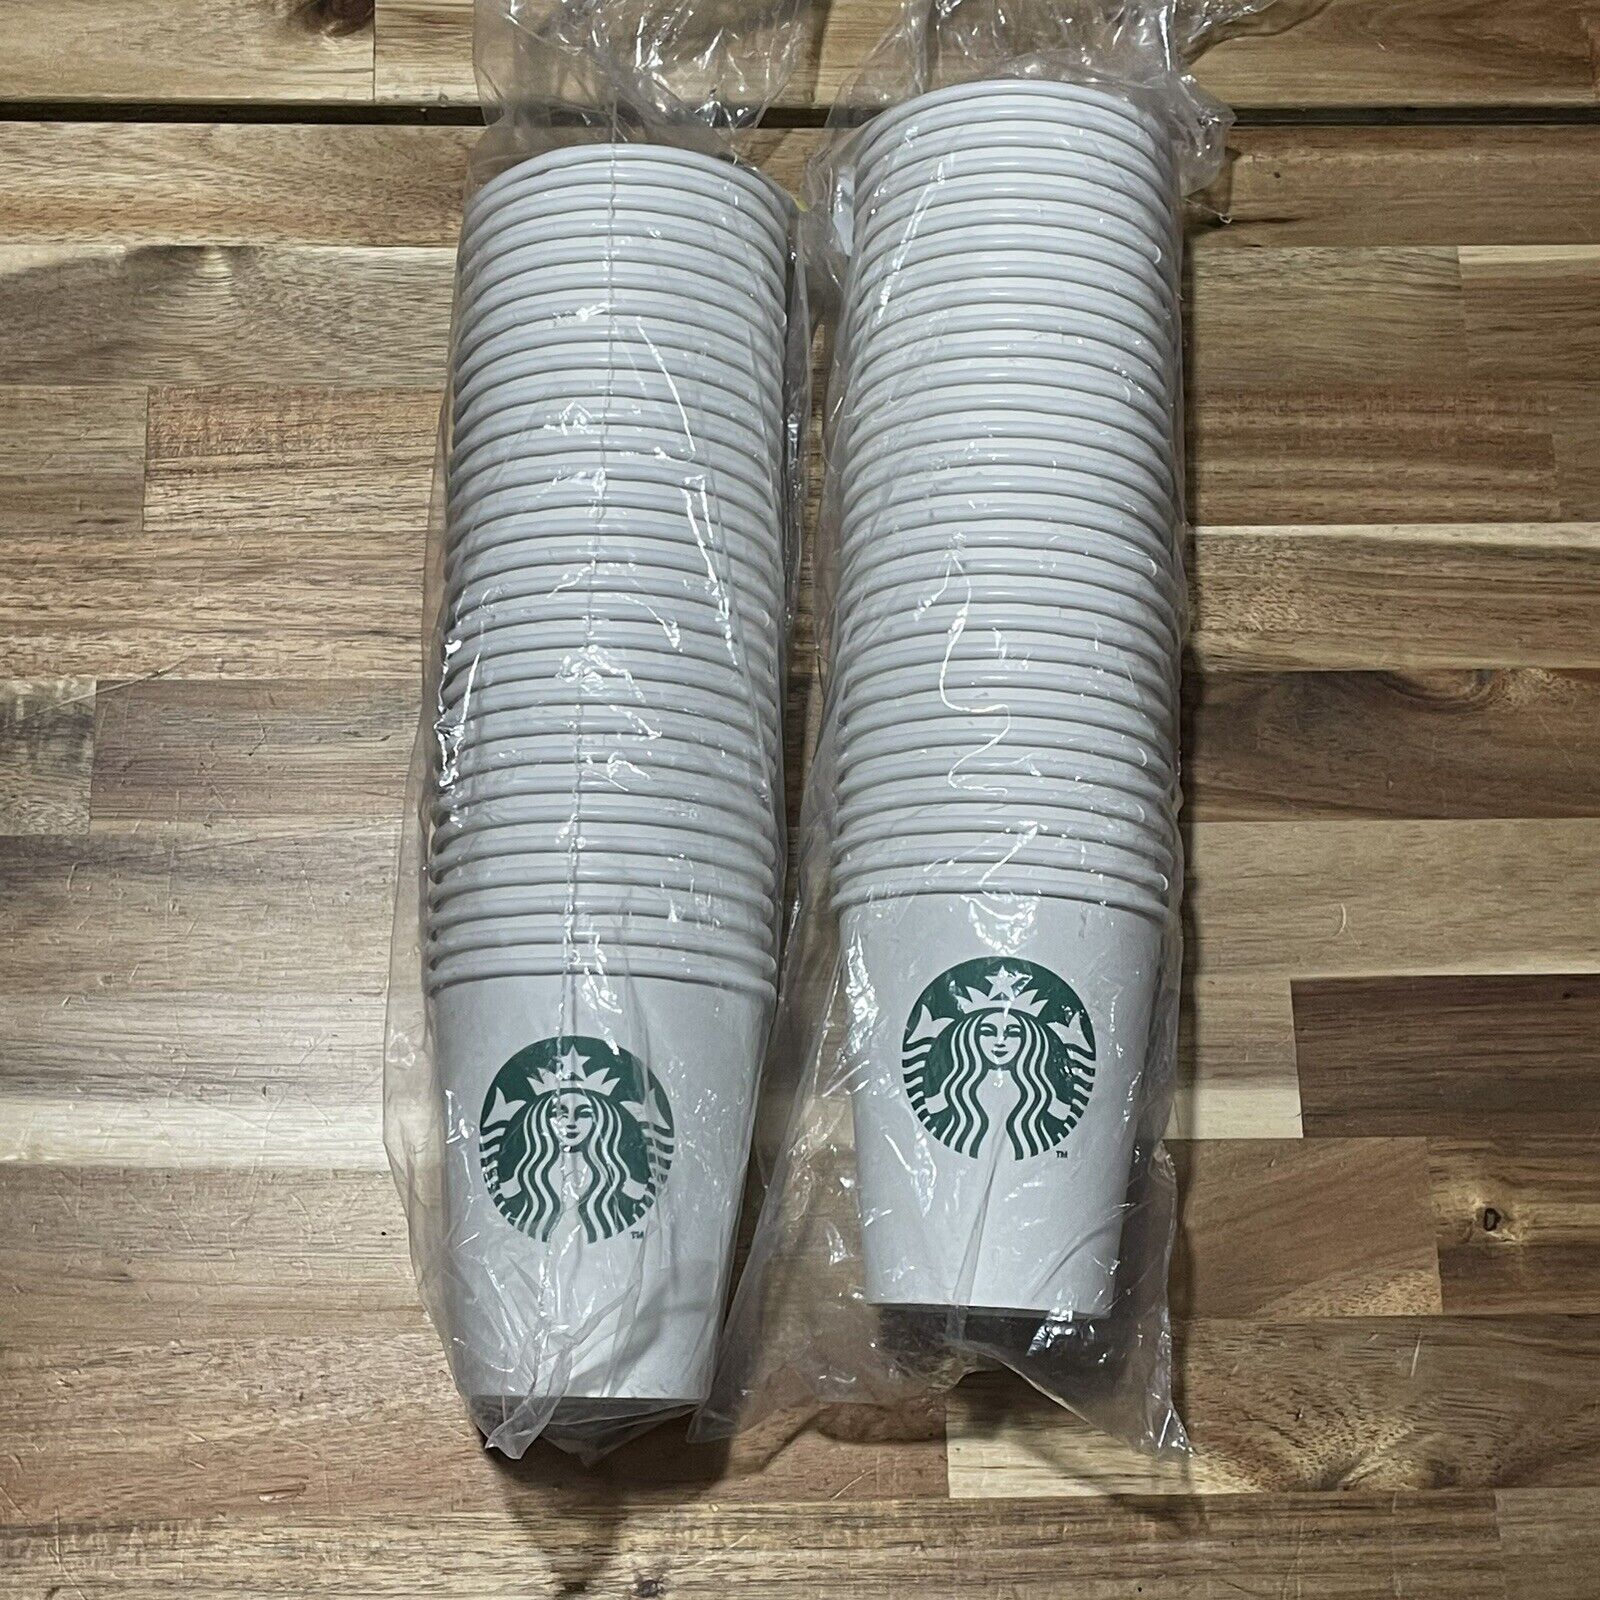 Starbucks 8 Oz Ounce Paper Cups 60 Two Sleeves Of 30 2019